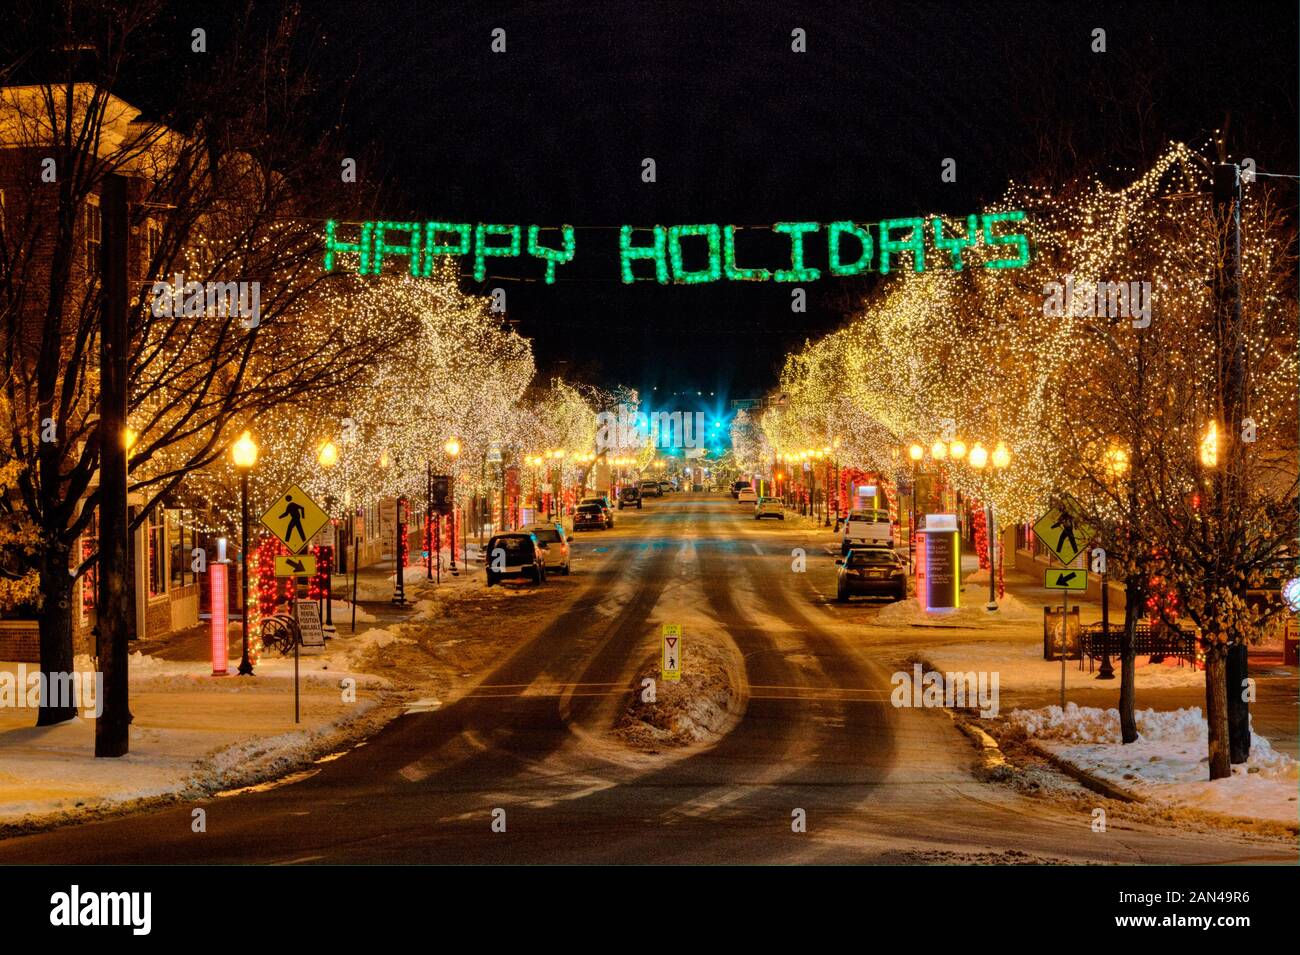 Downtown Littleton Colorado decorated for the holiday season. Stock Photo